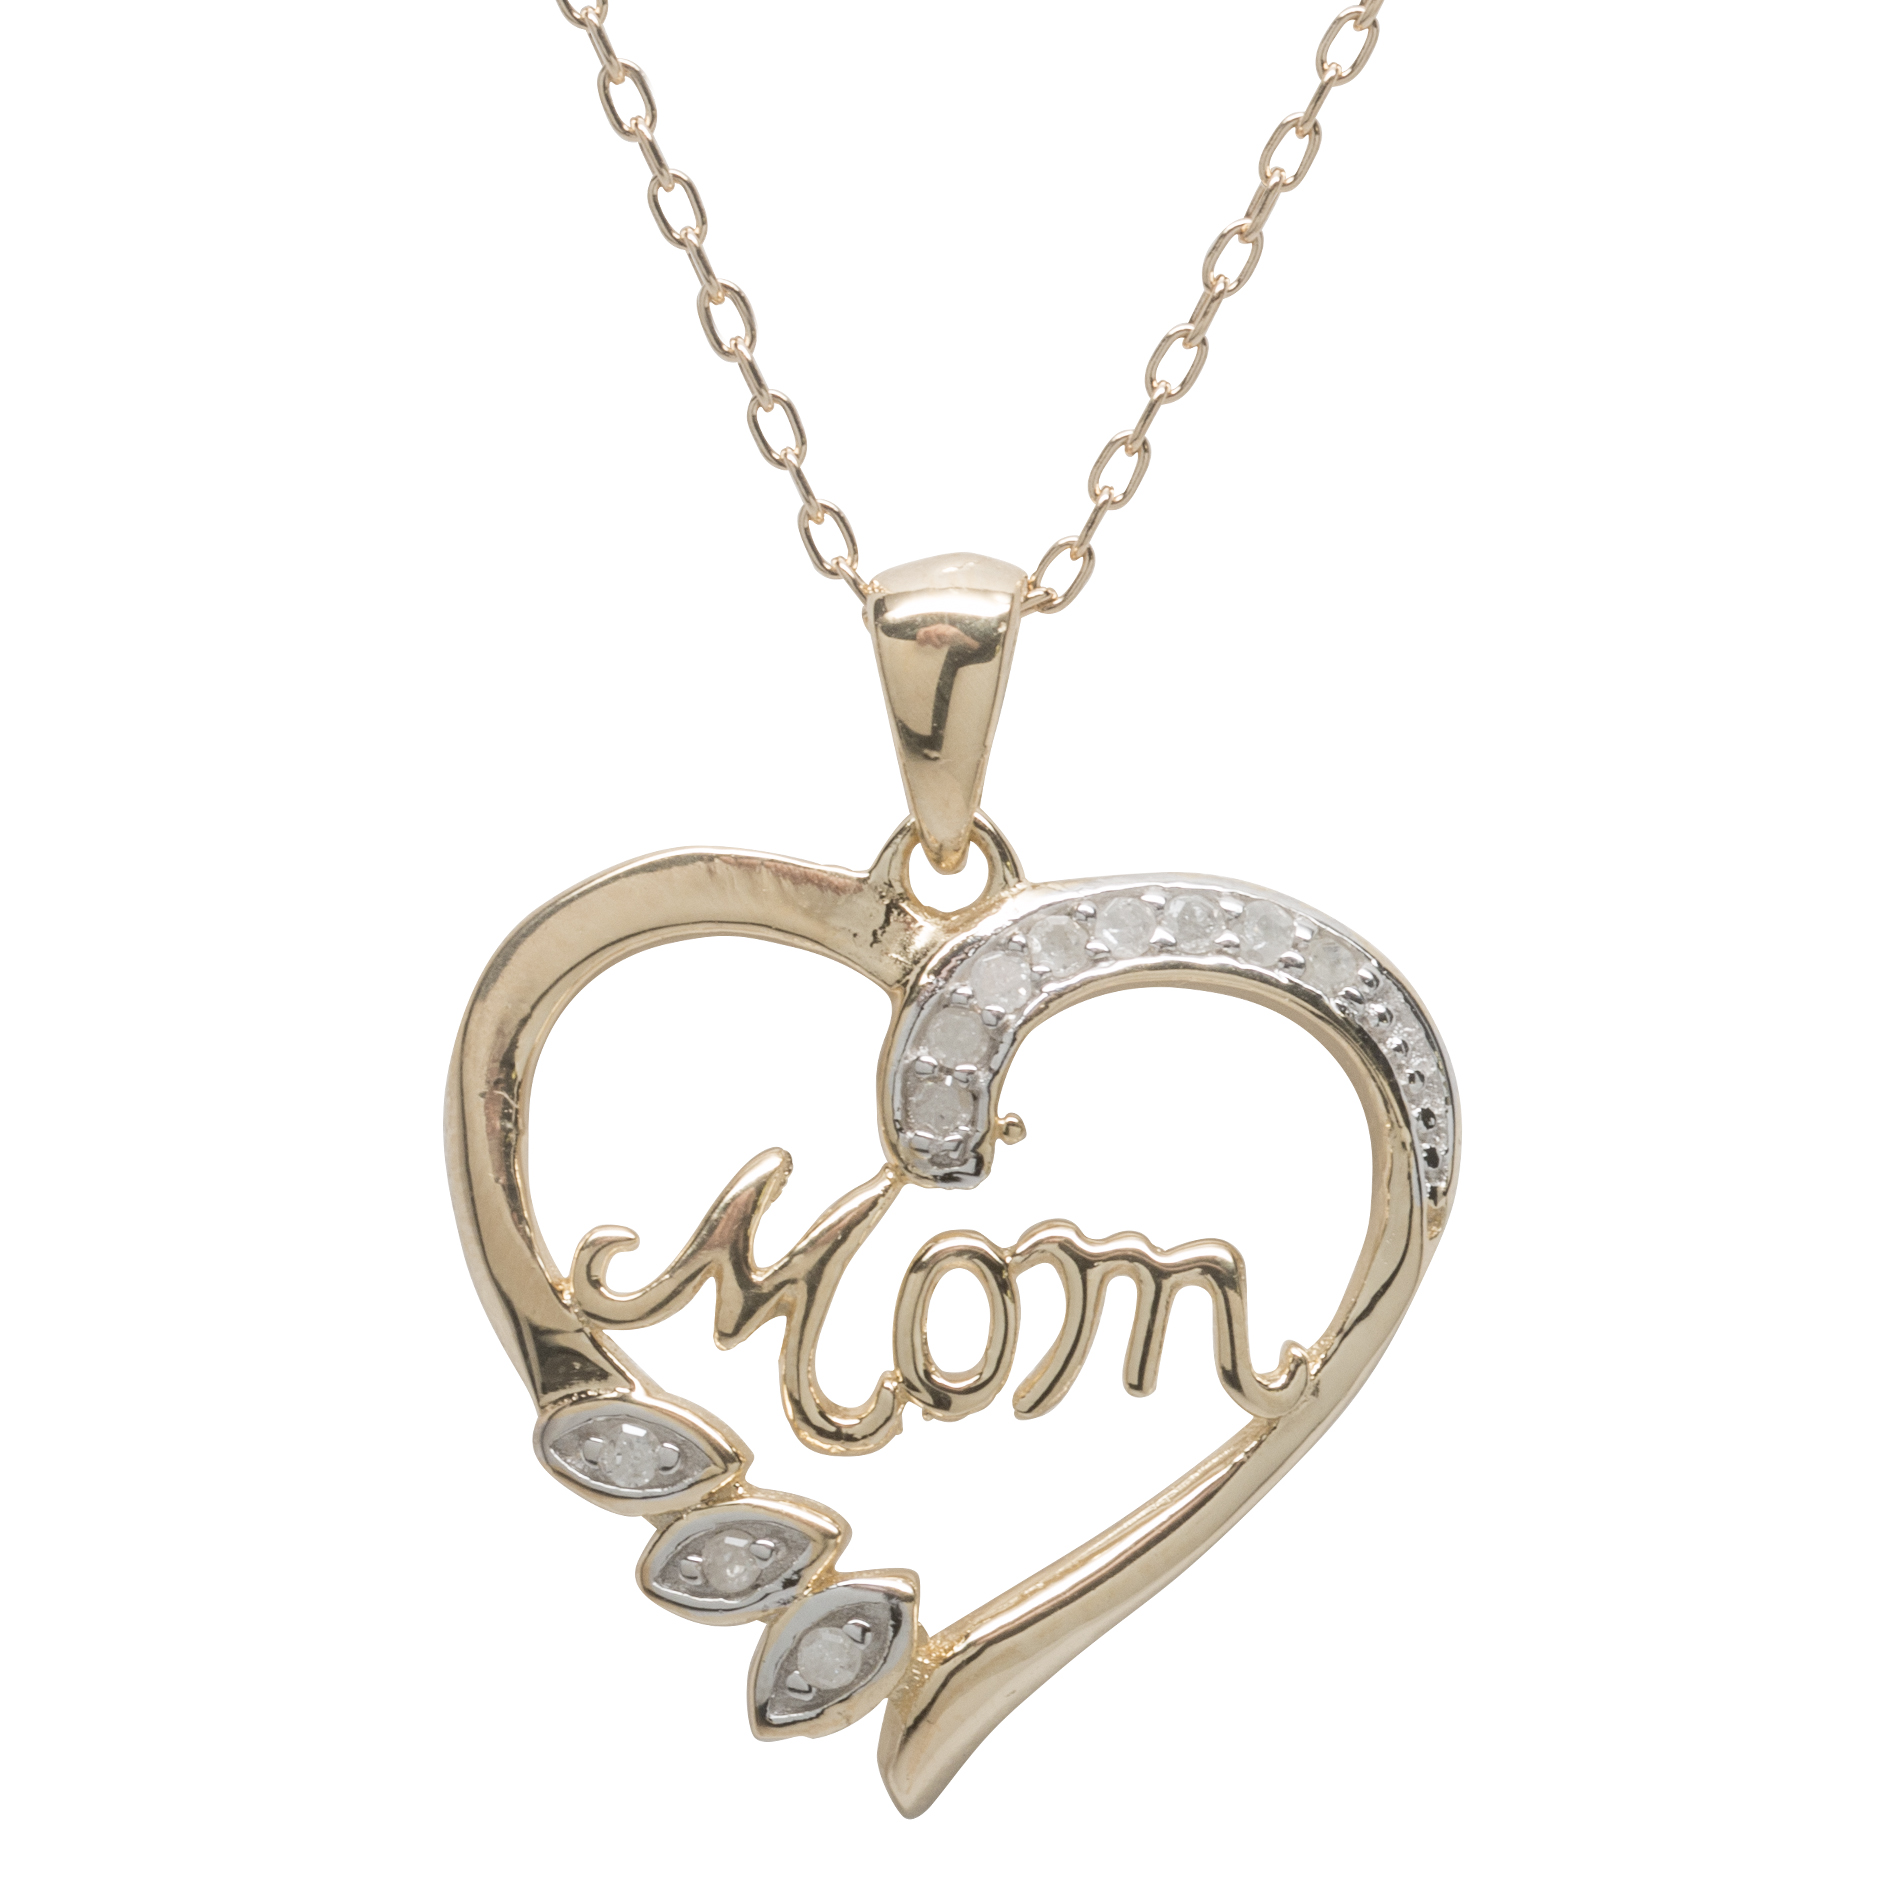 EXTRA 20% Off Jewelry for Mother’s Day at Kmart!